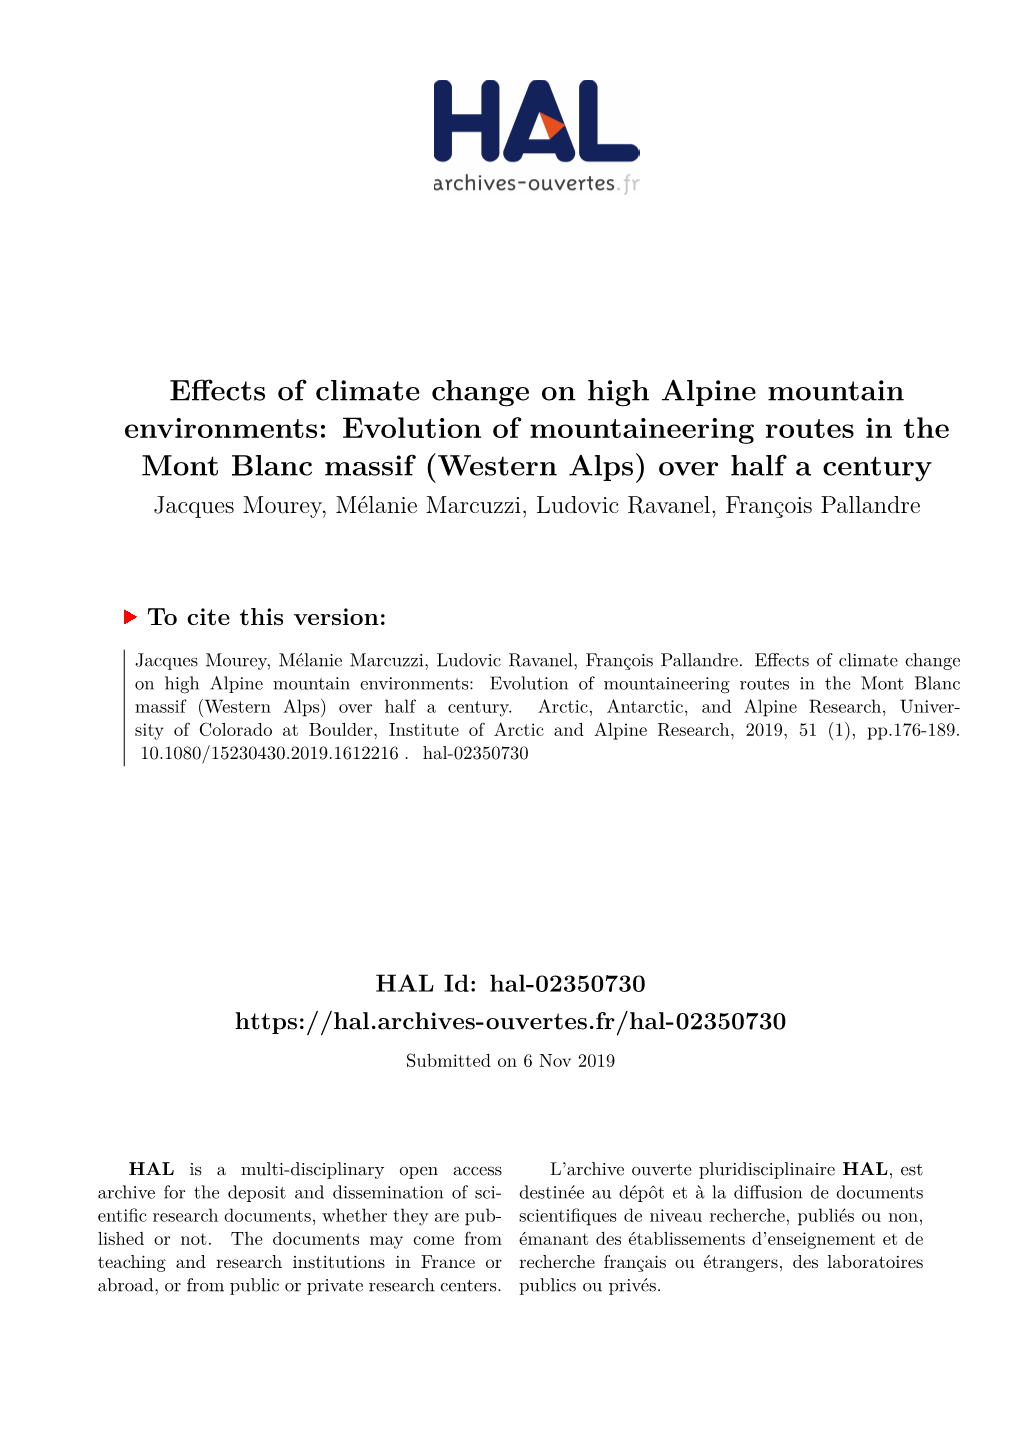 Effects of Climate Change on High Alpine